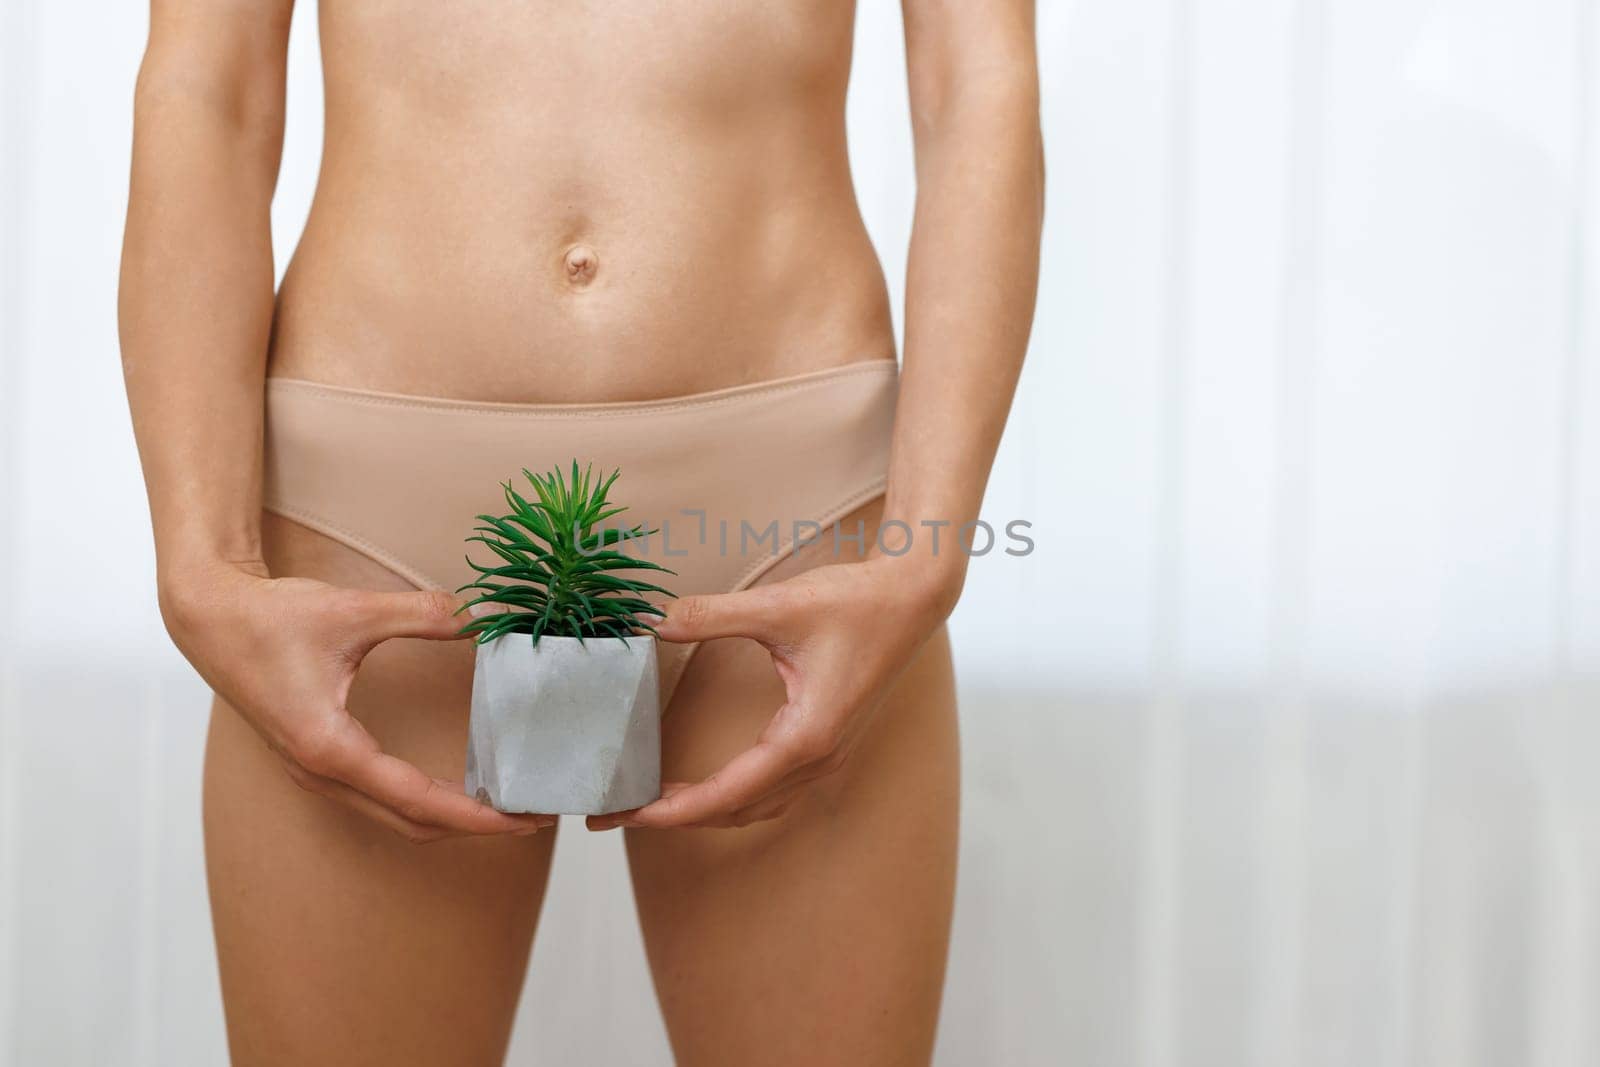 Depilation And Health Care In Underwear With Cactus In Hand. Woman with cactus showing smooth skin on background, closeup. Brazilian bikini epilation. by uflypro